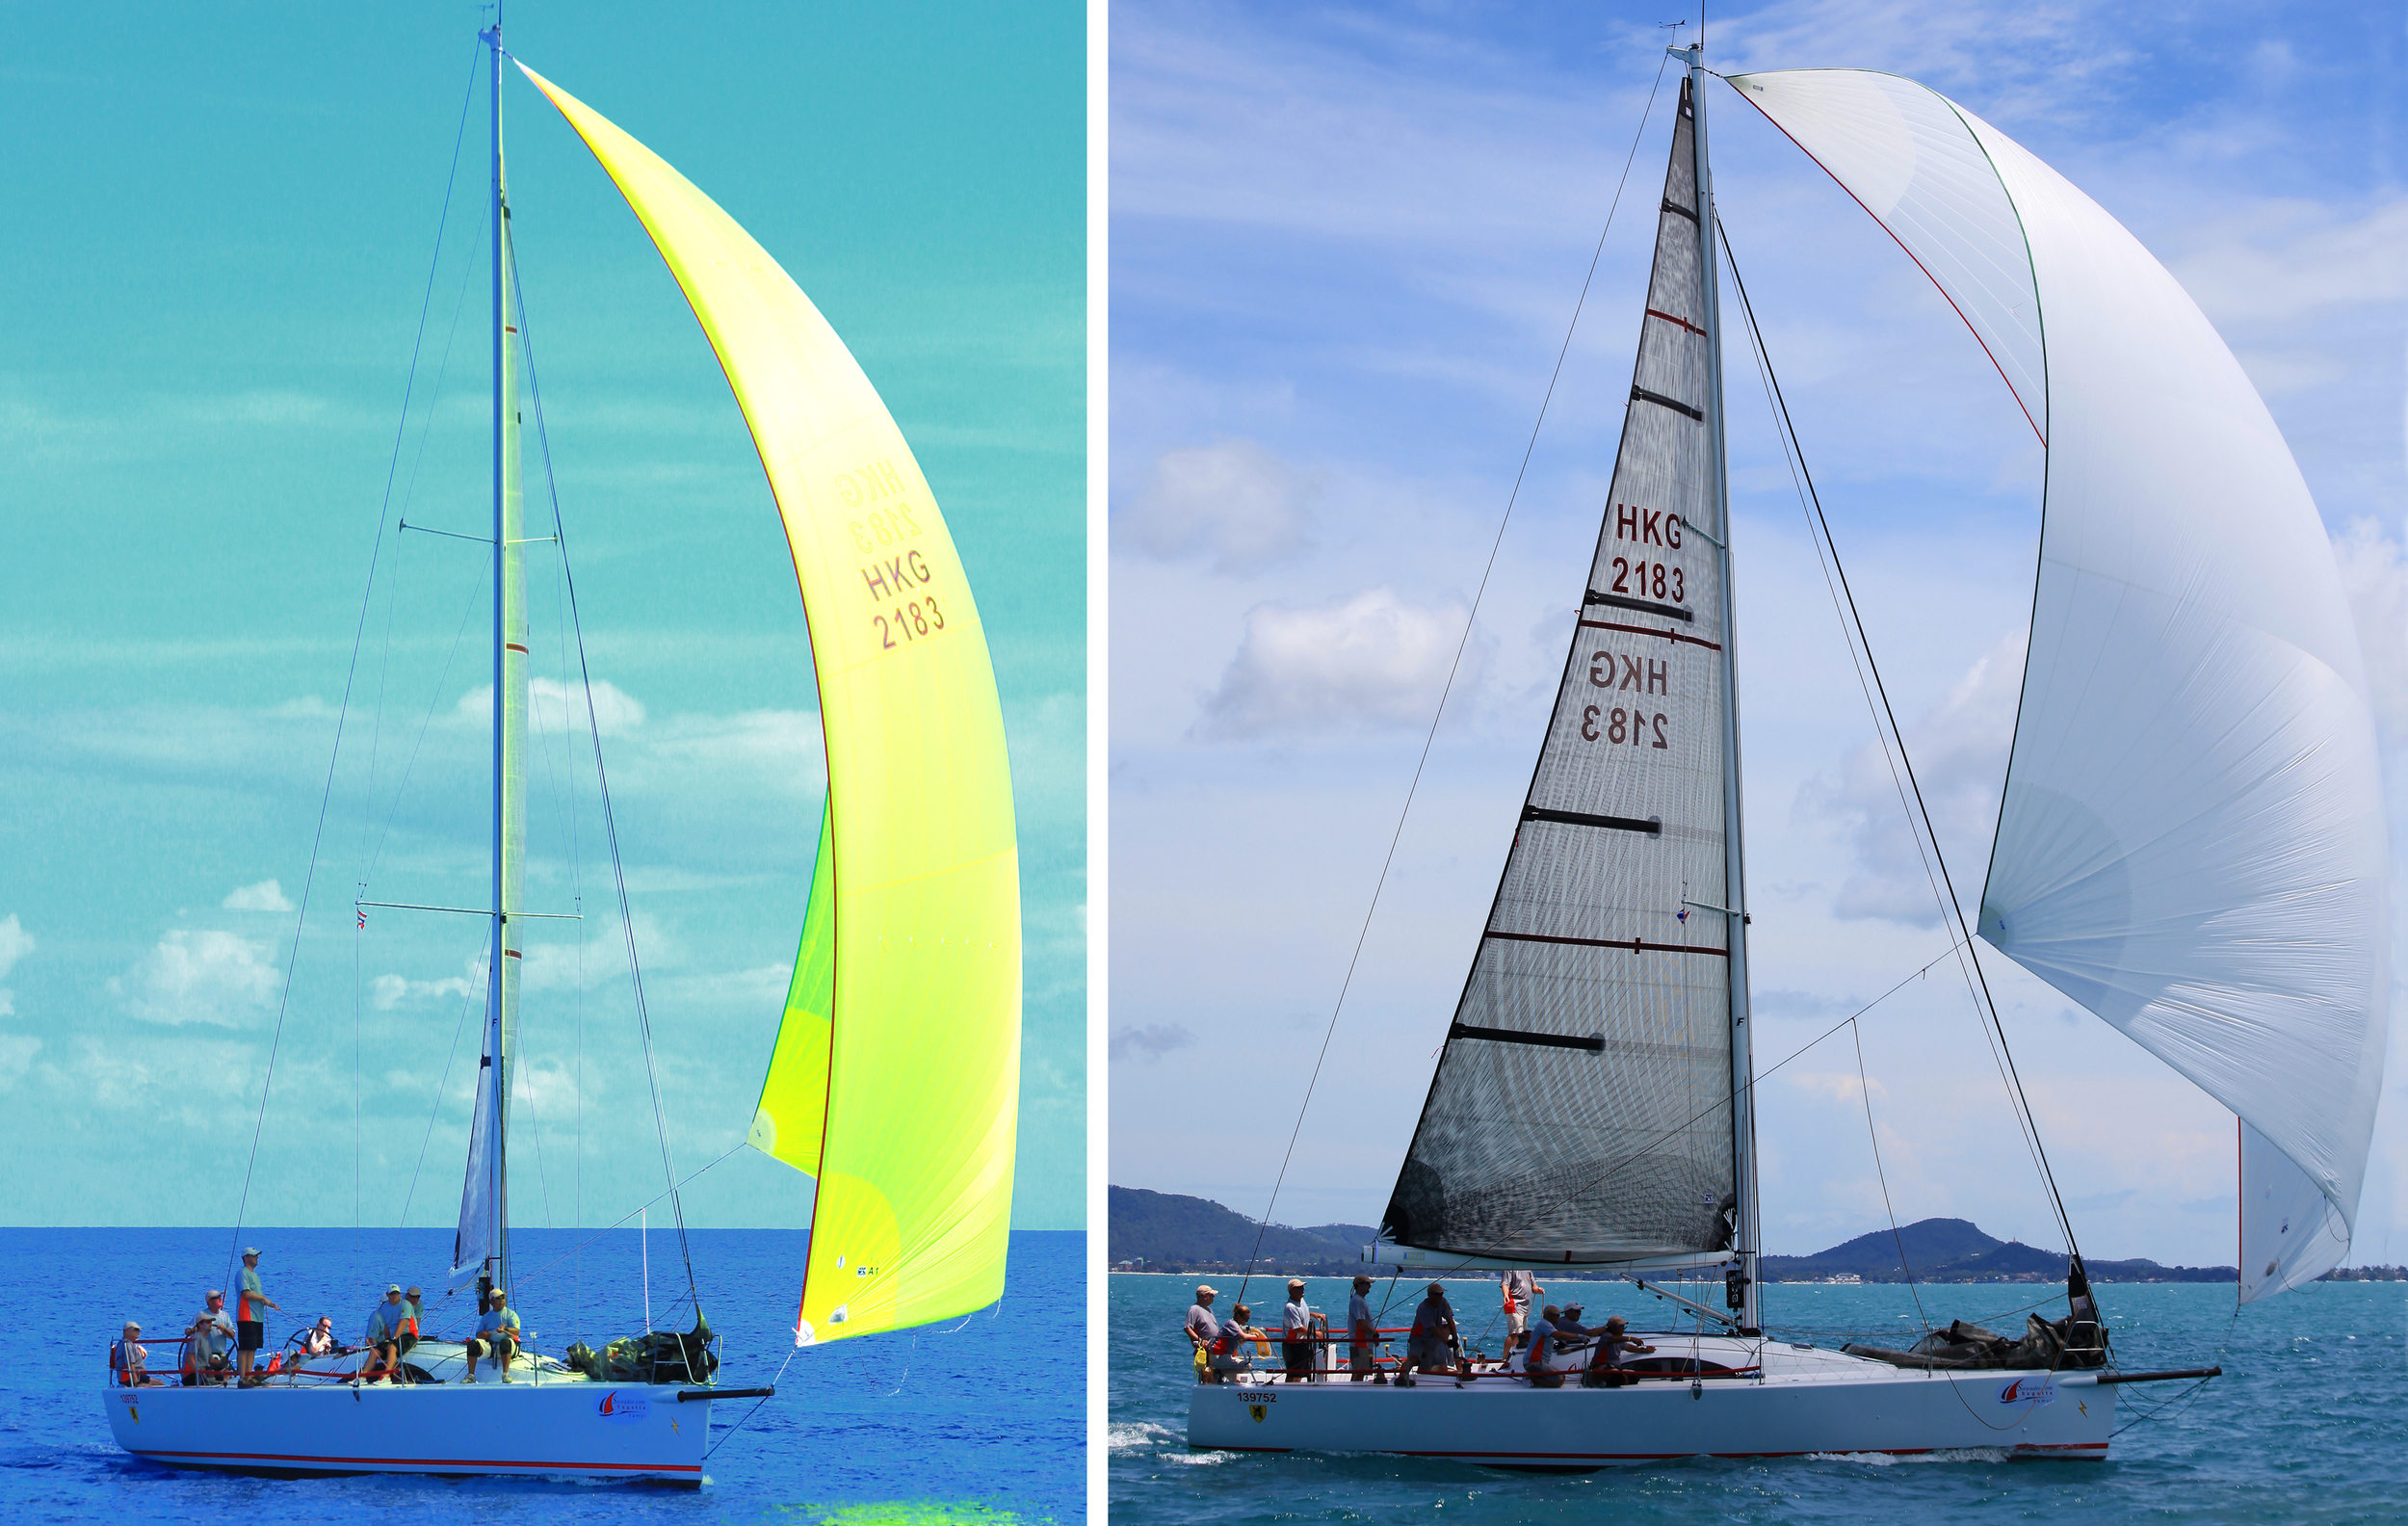 Two different spinnakers on the Archambault 40 RC ELEKTRA. On the left is the boat’s A1, which is flatter and smaller than the A2 shown on the right.